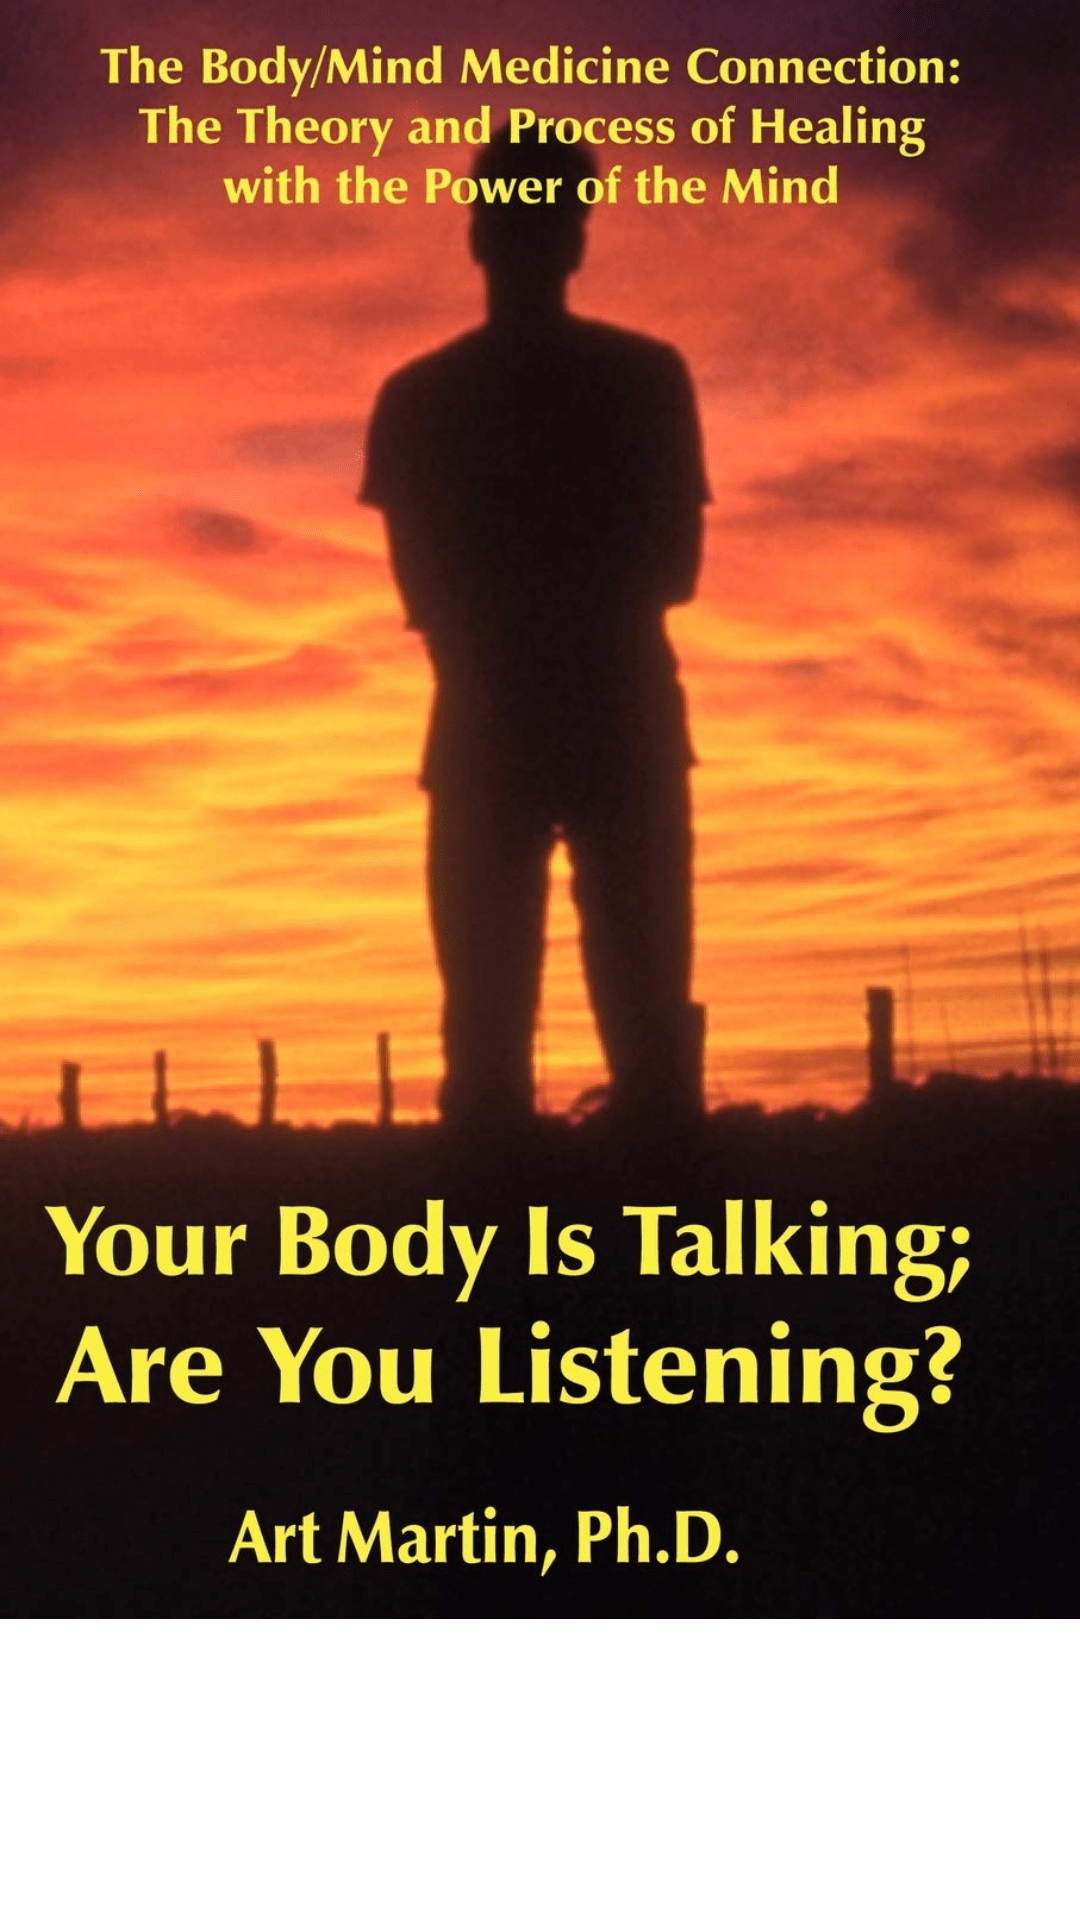 Your Body Is Talking; Are You Listening? by Art Martin